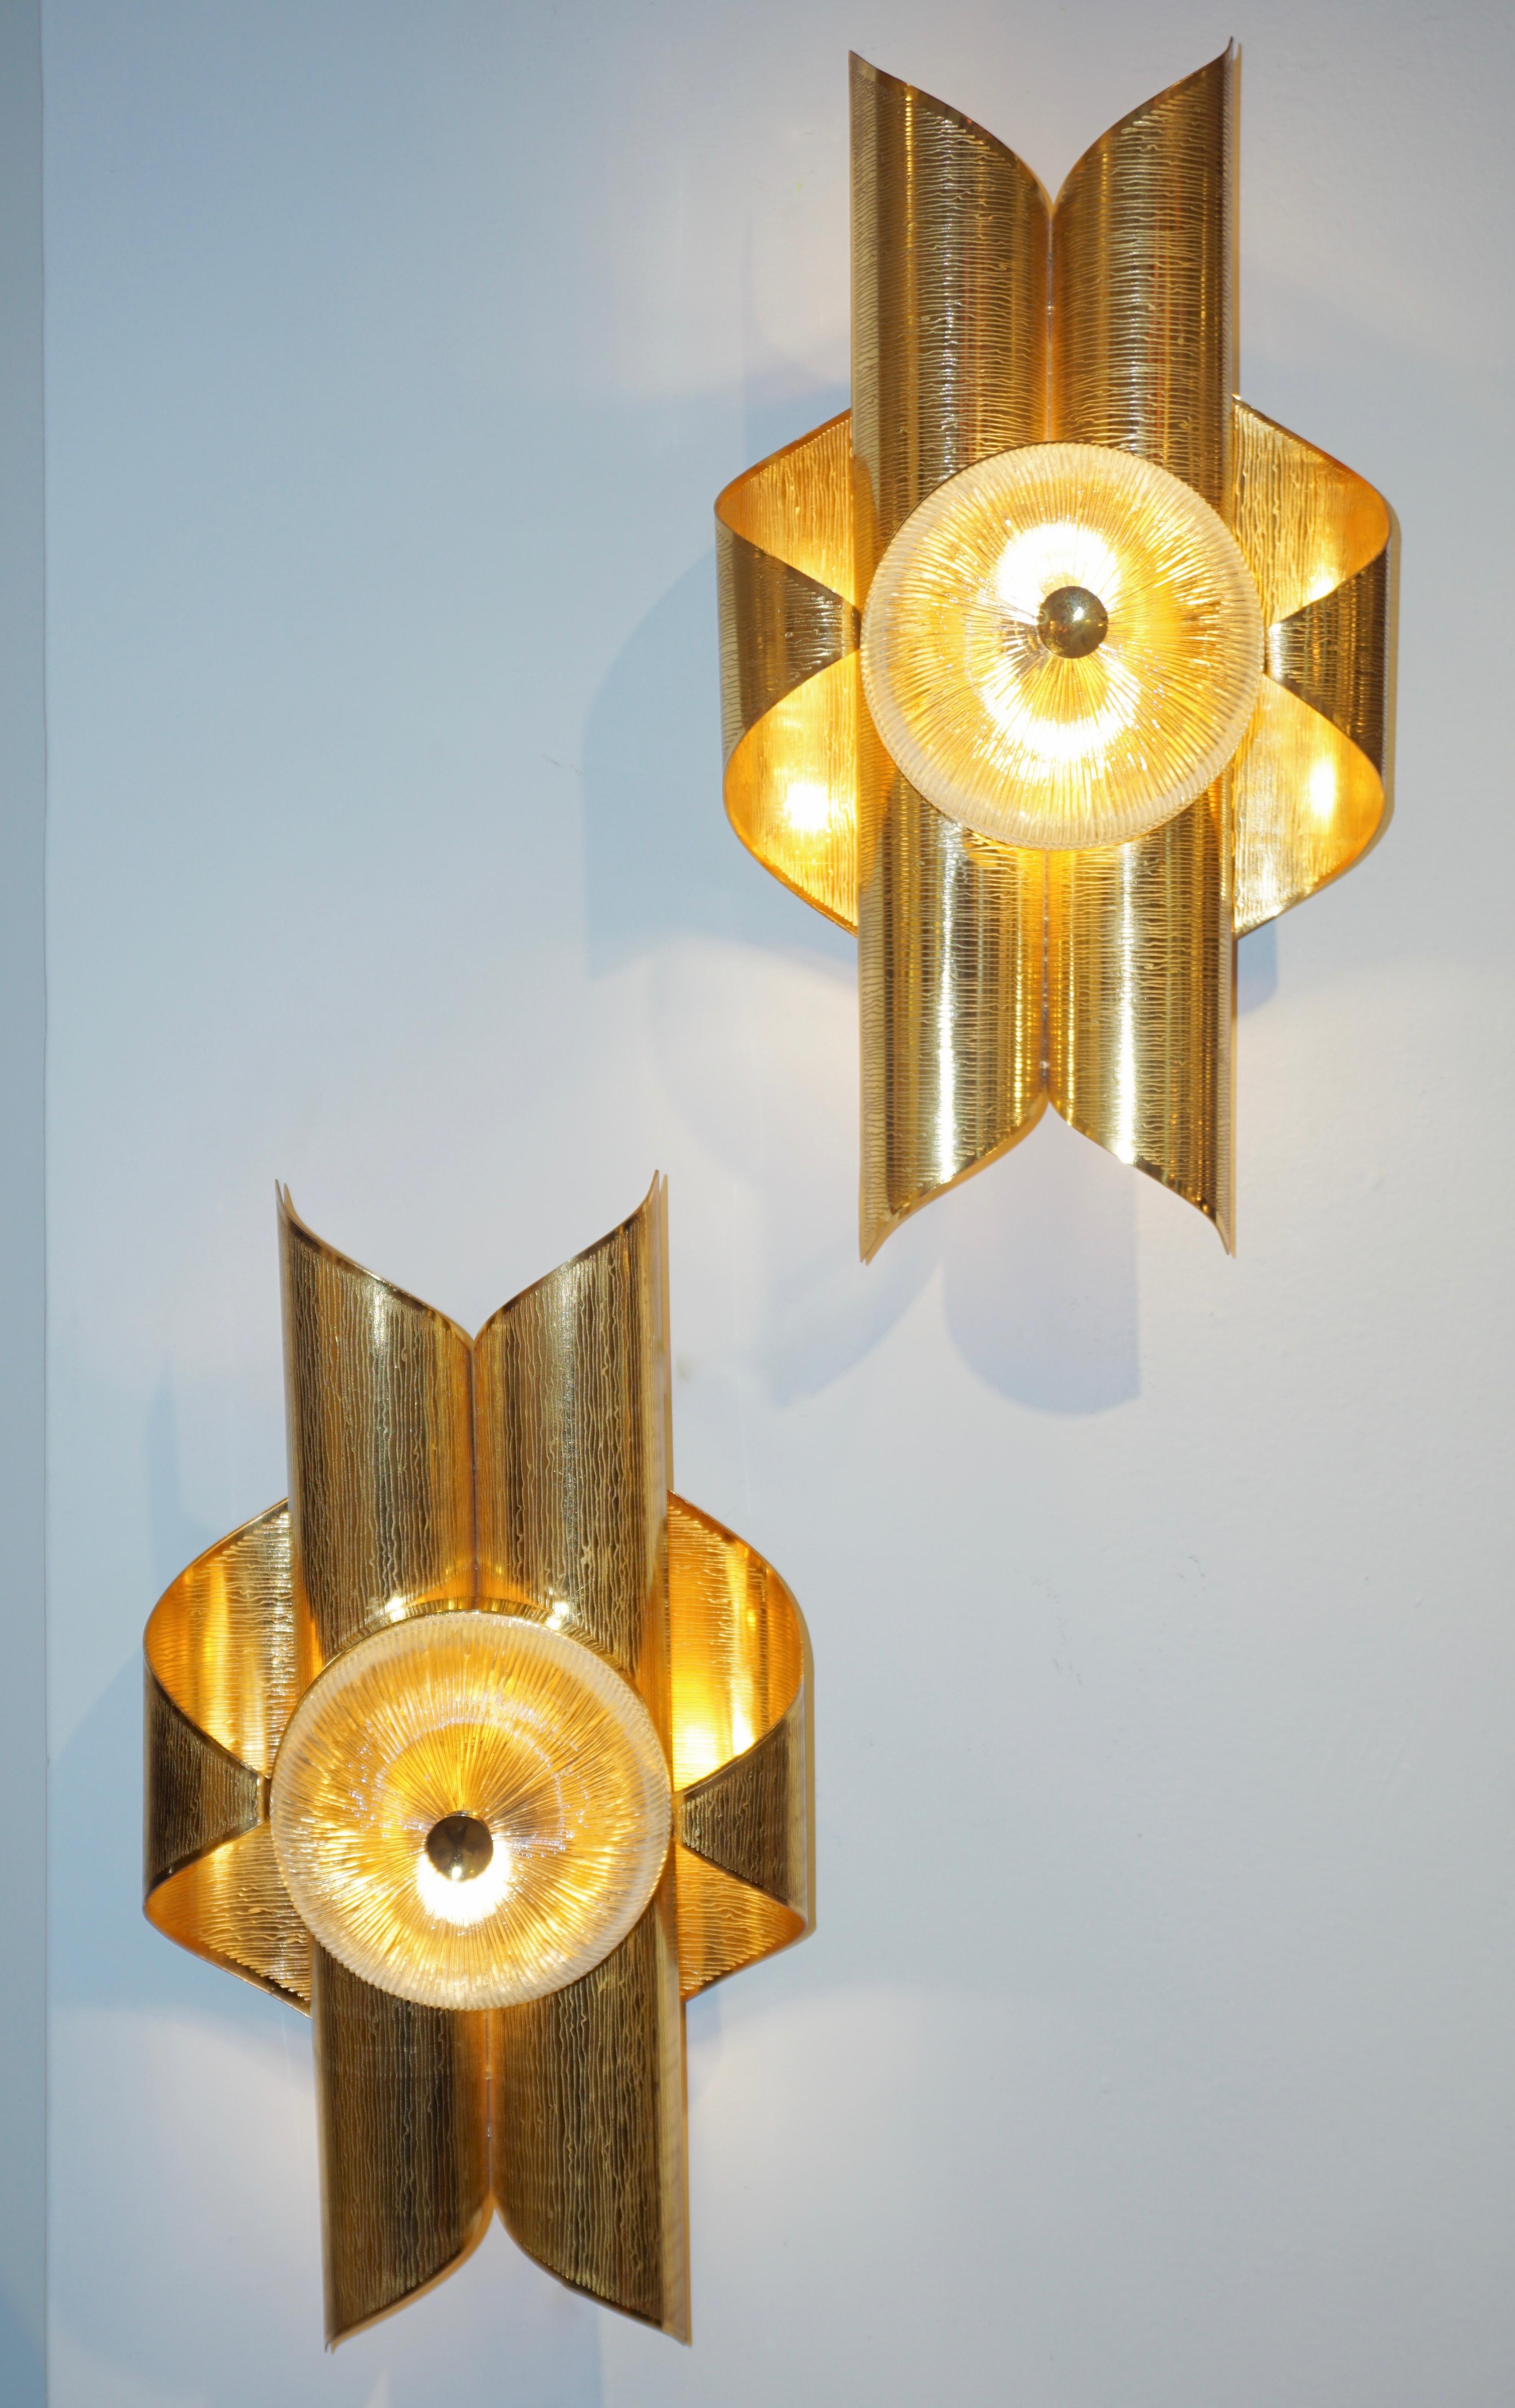 Mid-Century Modern French Hollywood Regency style wall lights, entirely handcrafted, with an Art Deco flair. The folded brass scrolled body has a curvaceous and sensuous design highlighted by a round crystal clear ribbed glass core that, when lit,